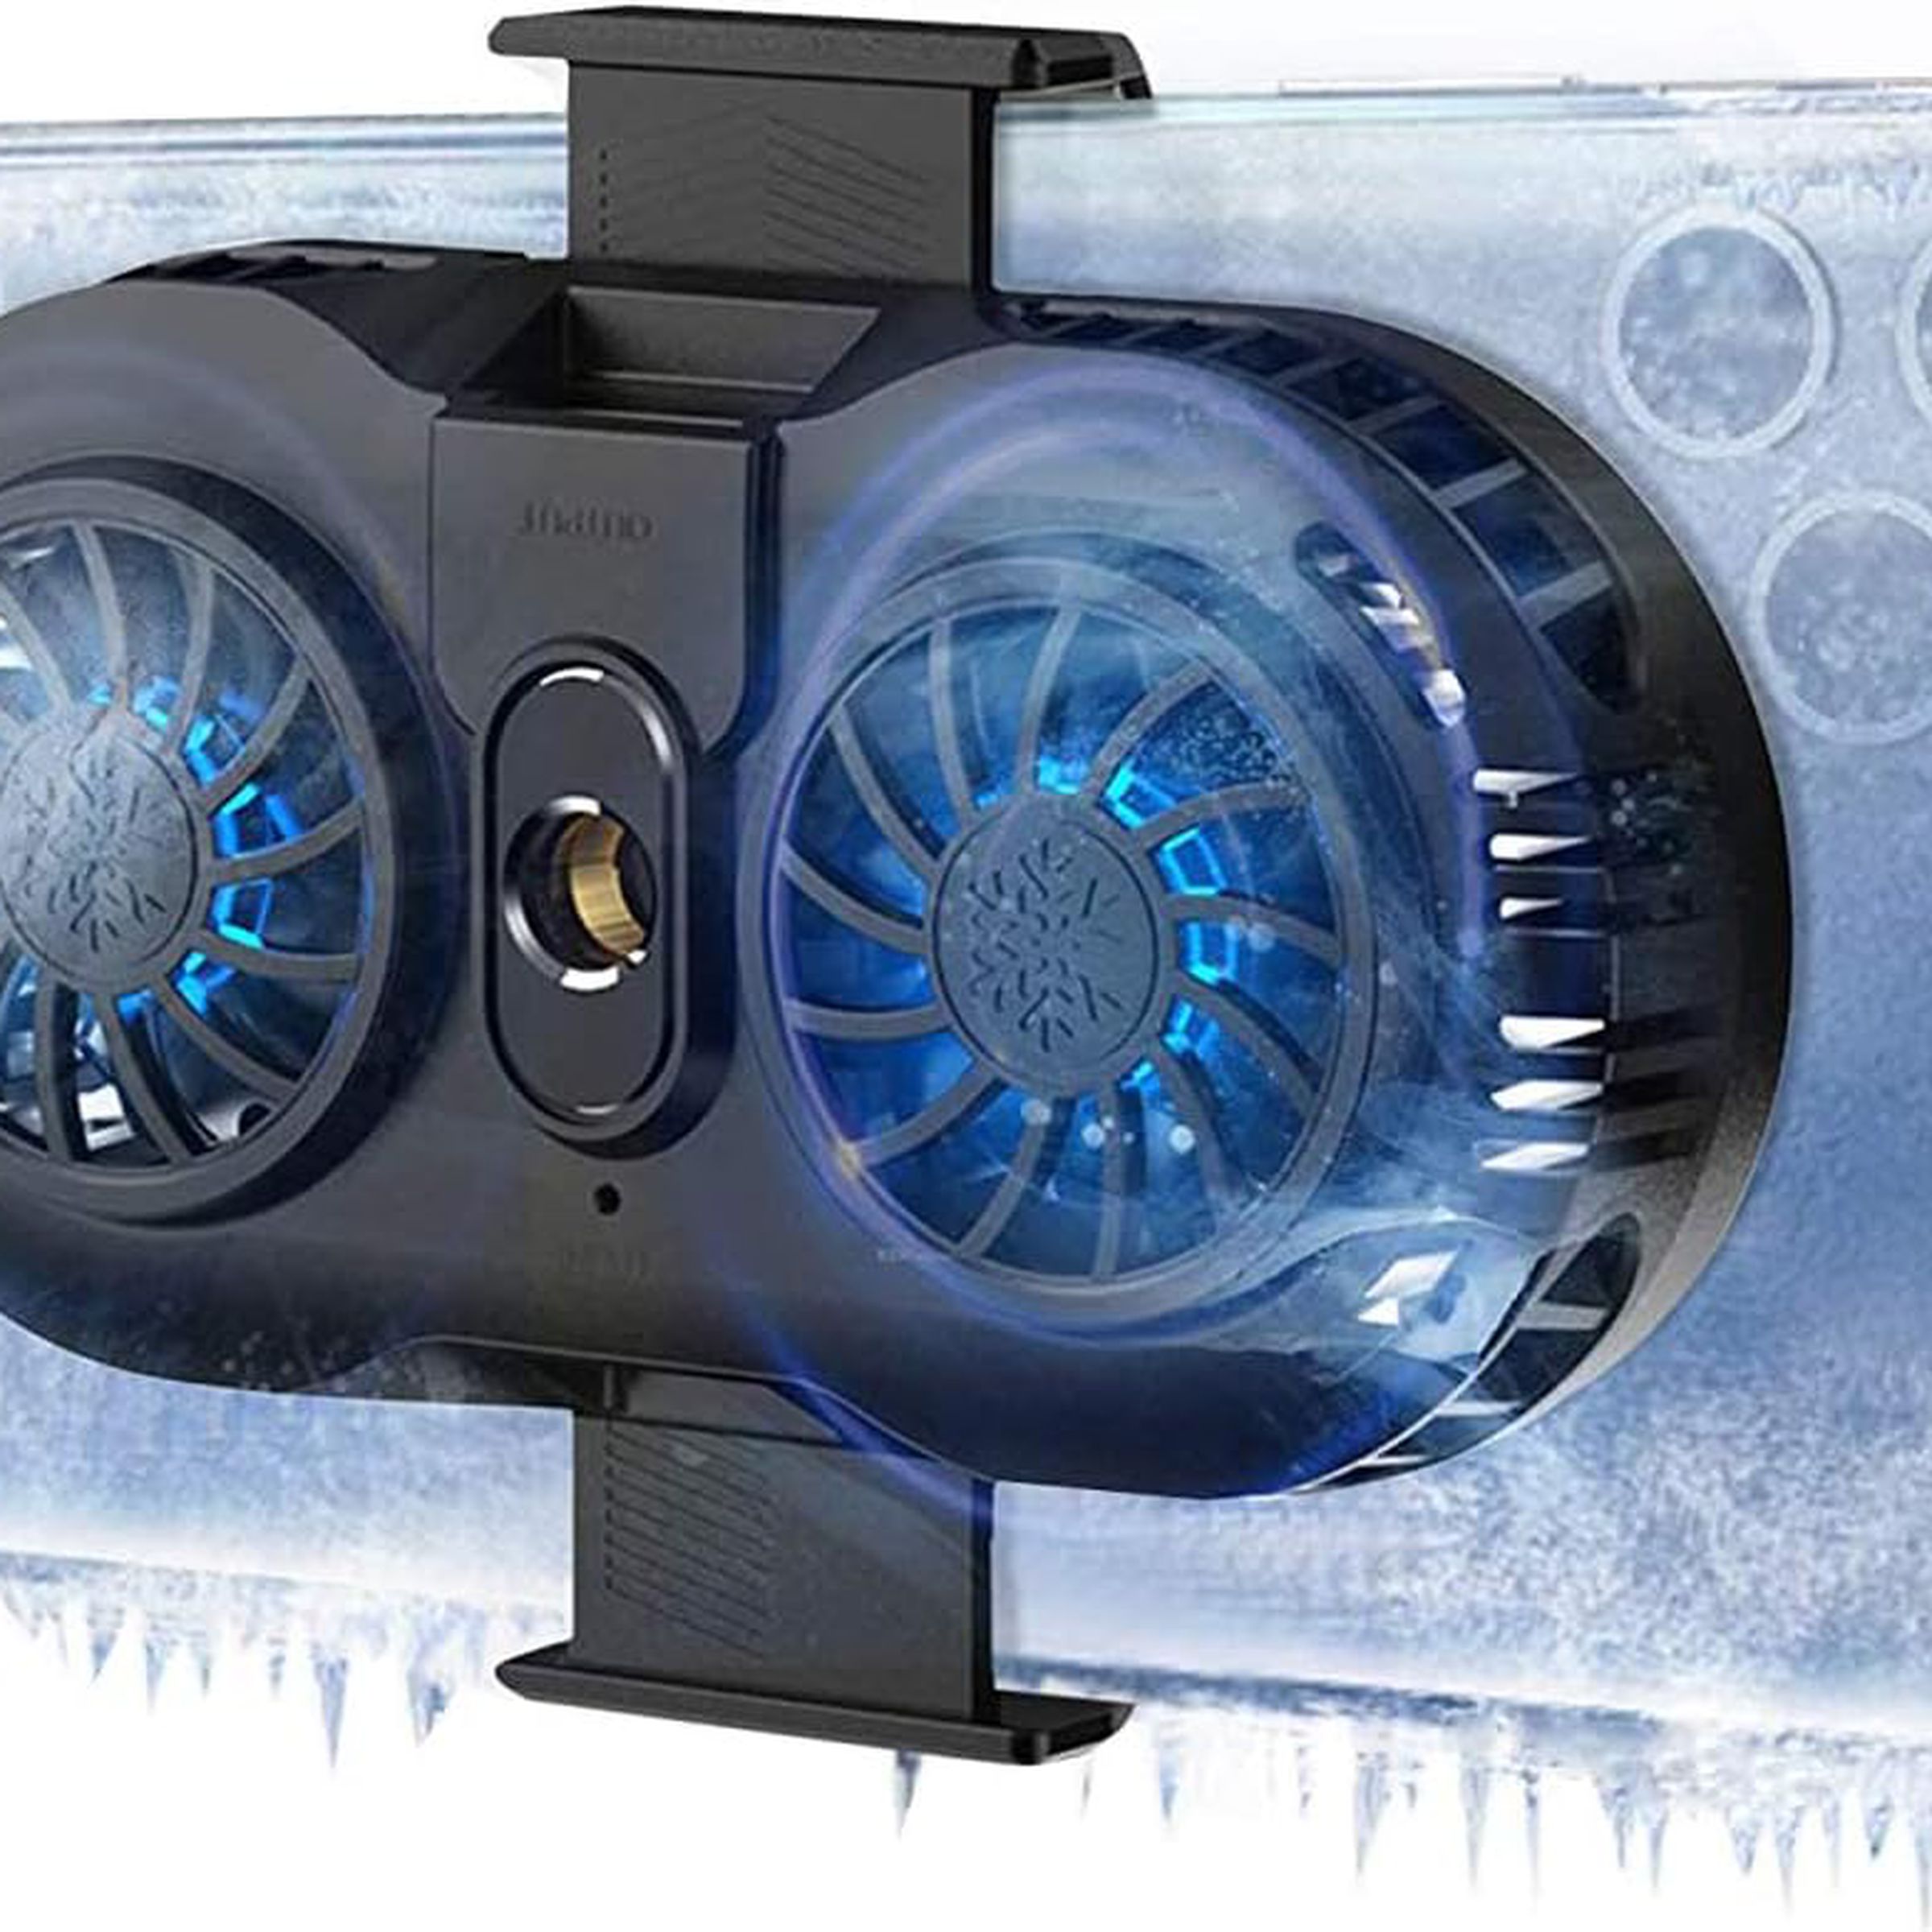 A picture of what looks like an iPhone 11 Pro with a dual-turbine fan attached using clips that hold the sides of the phone, which is covered in ice and icicles.